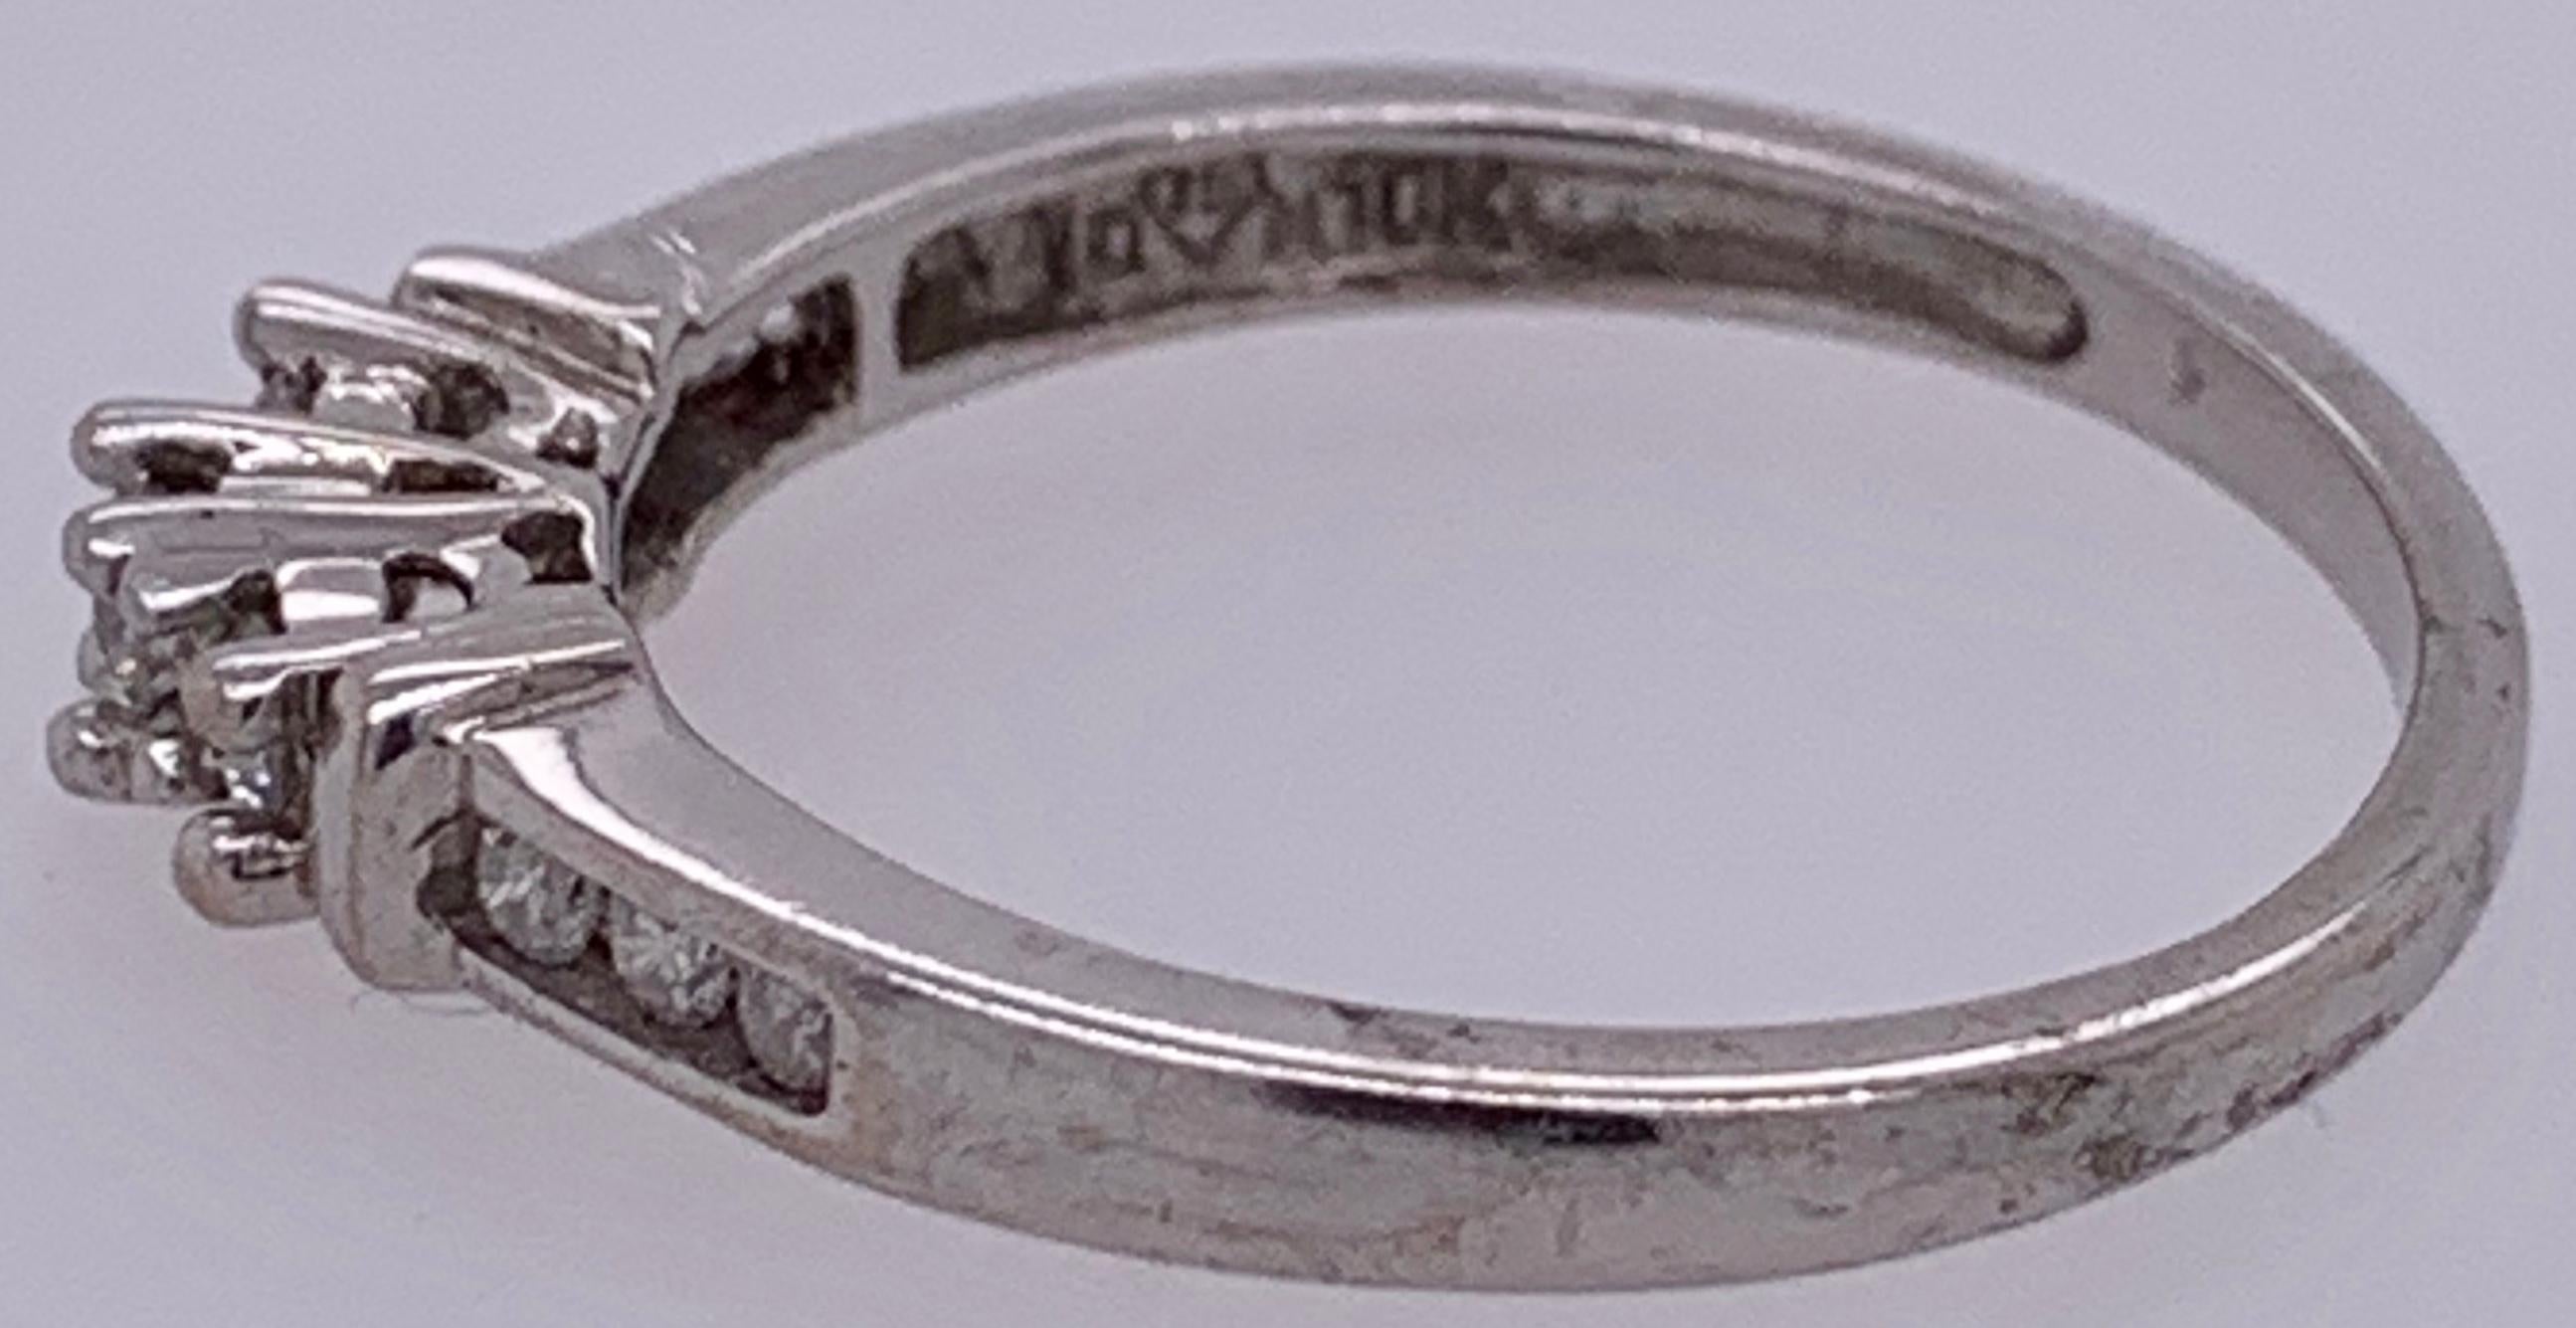 weight of ring in grams